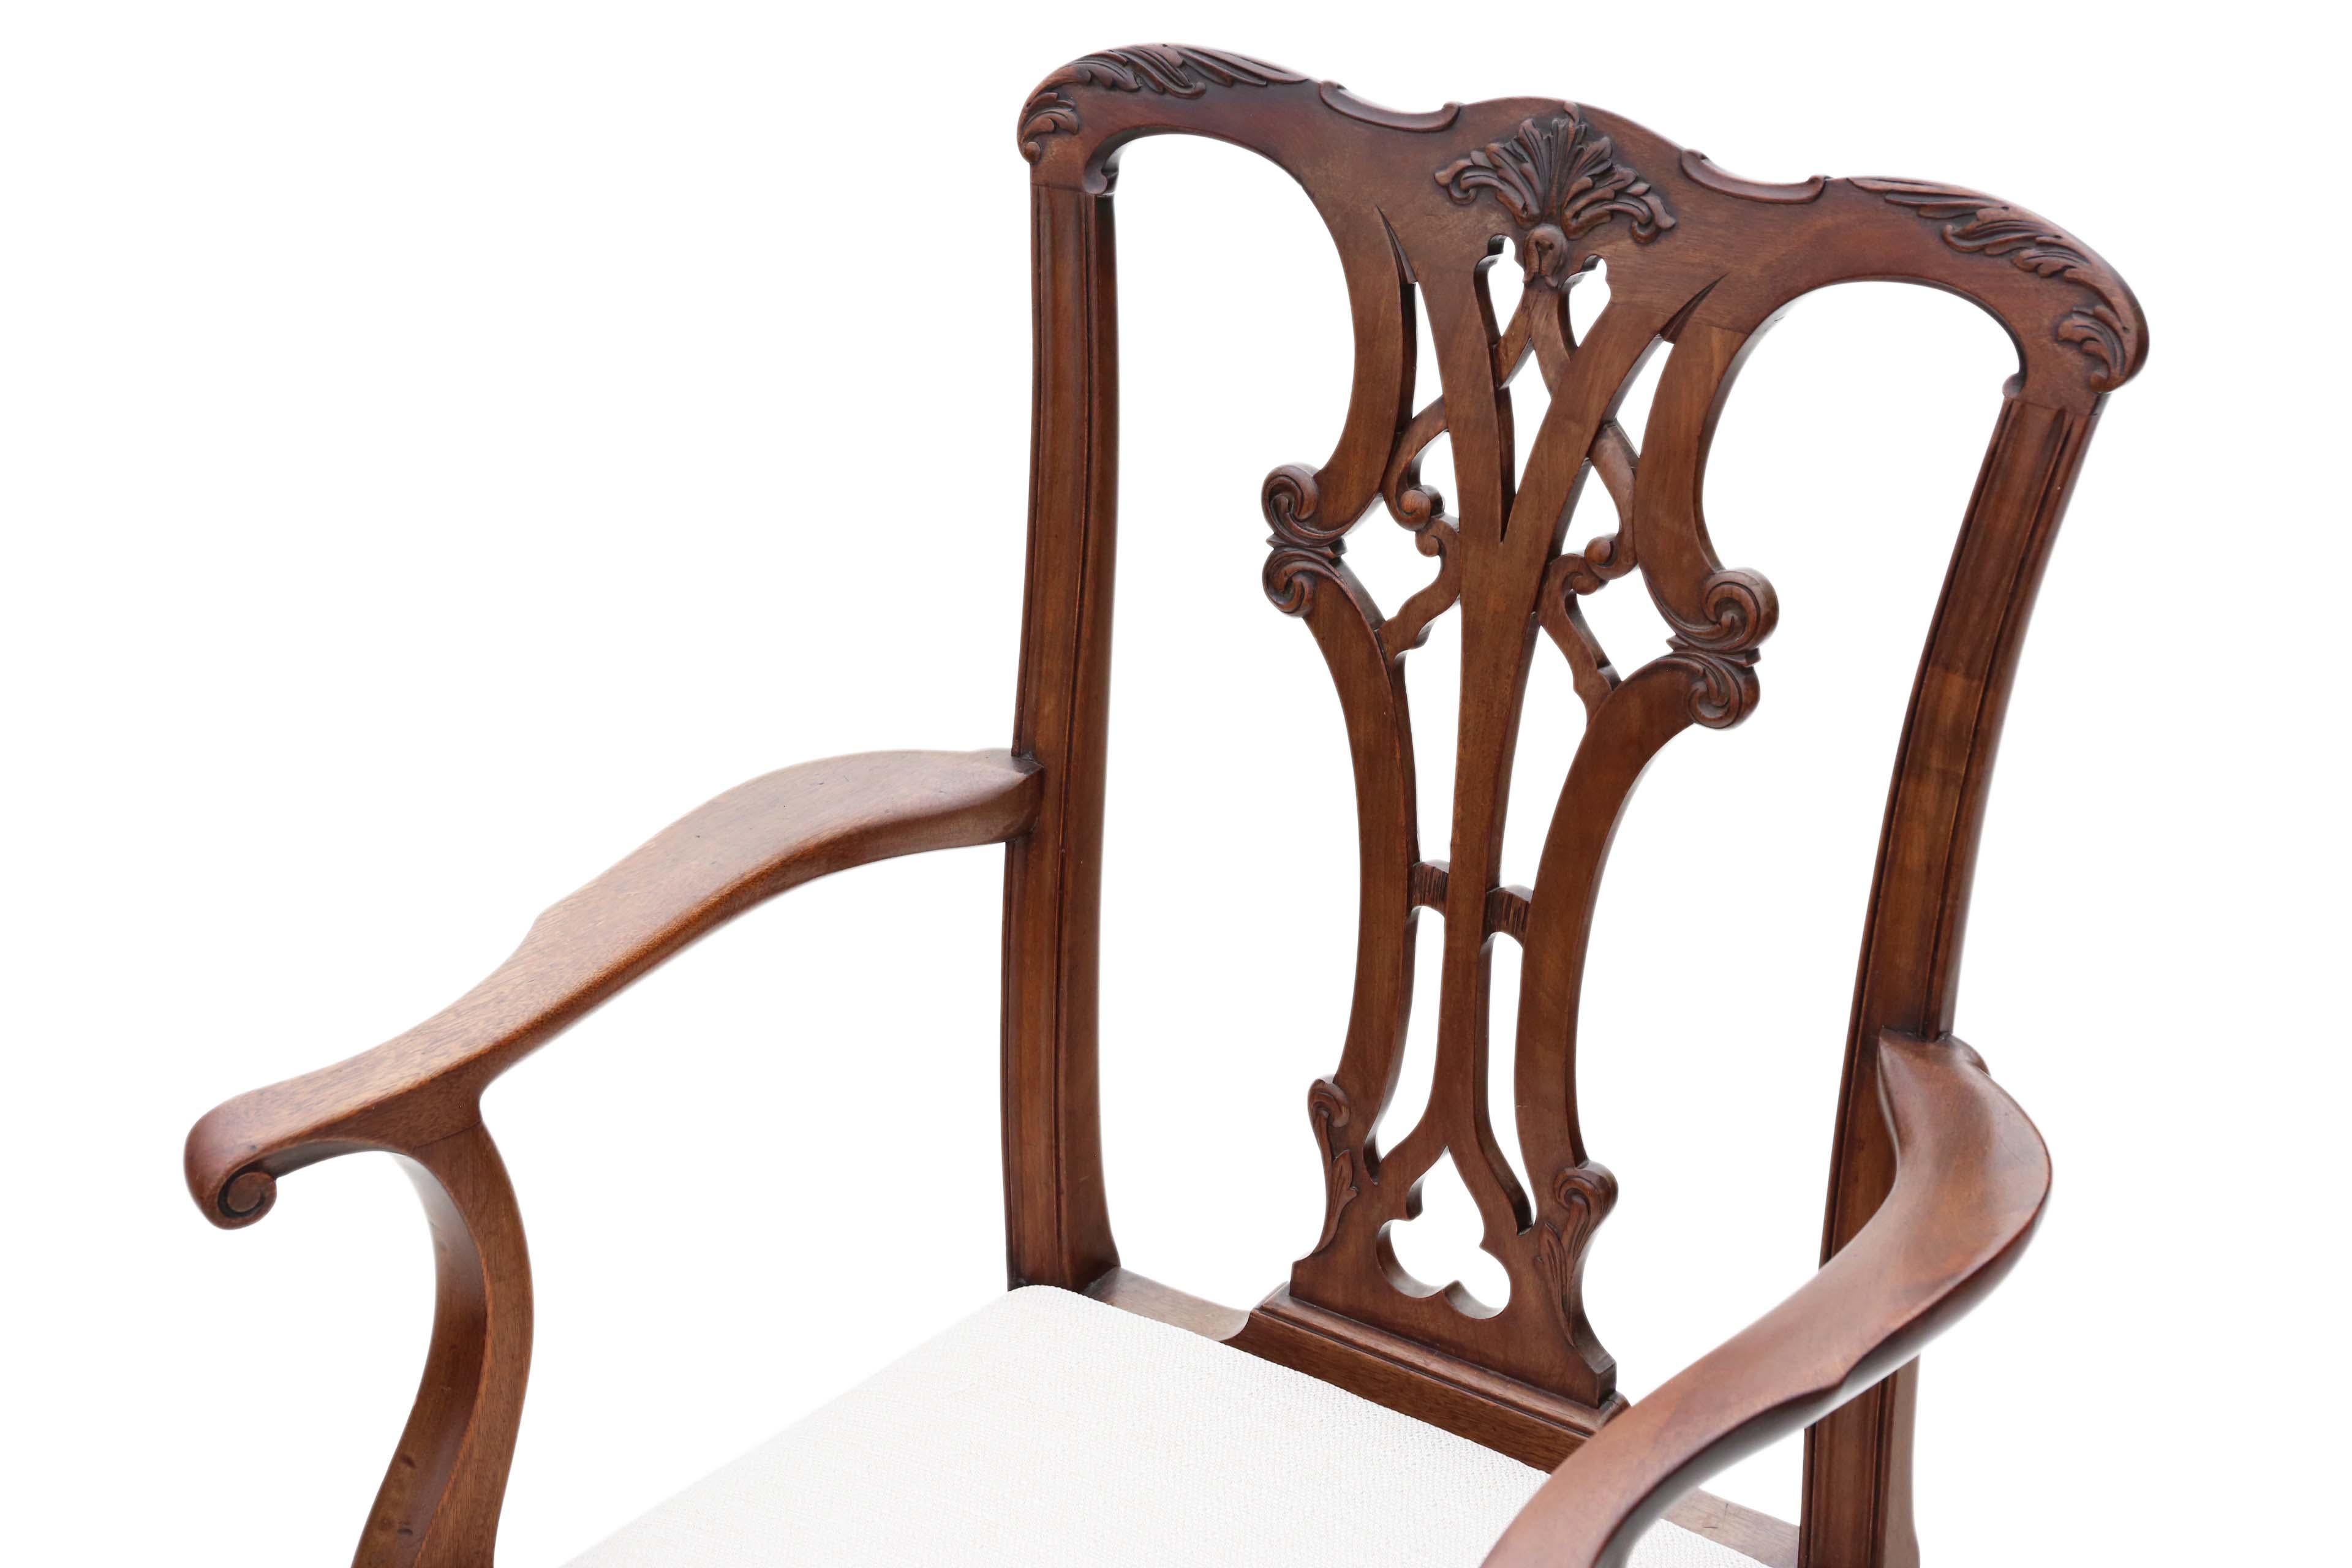 Georgian Revival Mahogany Dining Chairs: Set of 8 (6+2), Antique Quality, C1910 For Sale 2